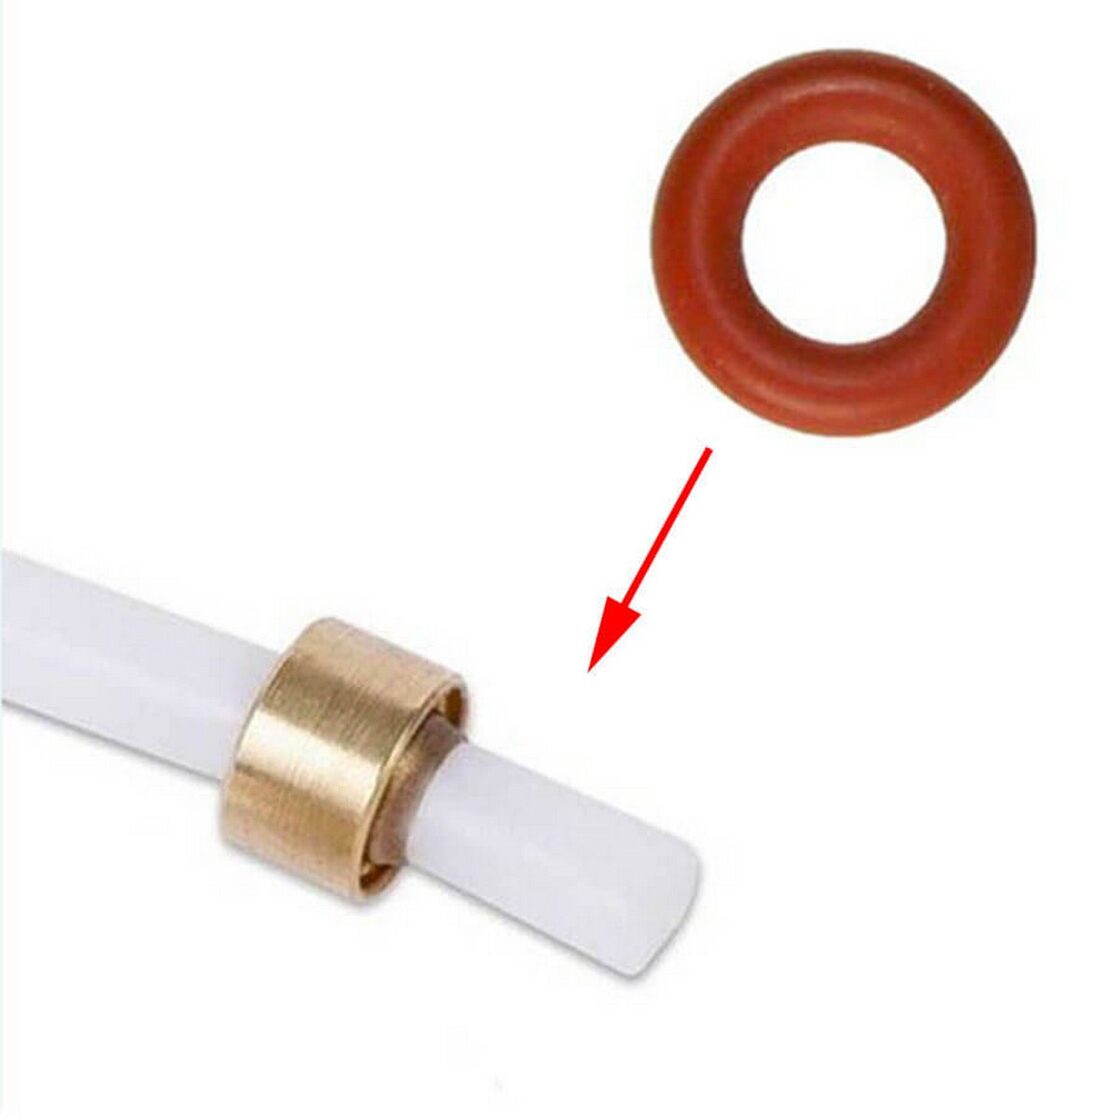 O-ring, gasket suitable for DeLonghi pressure hose. The sealing ring is compatible with EAM, ESAM, ECAM models.